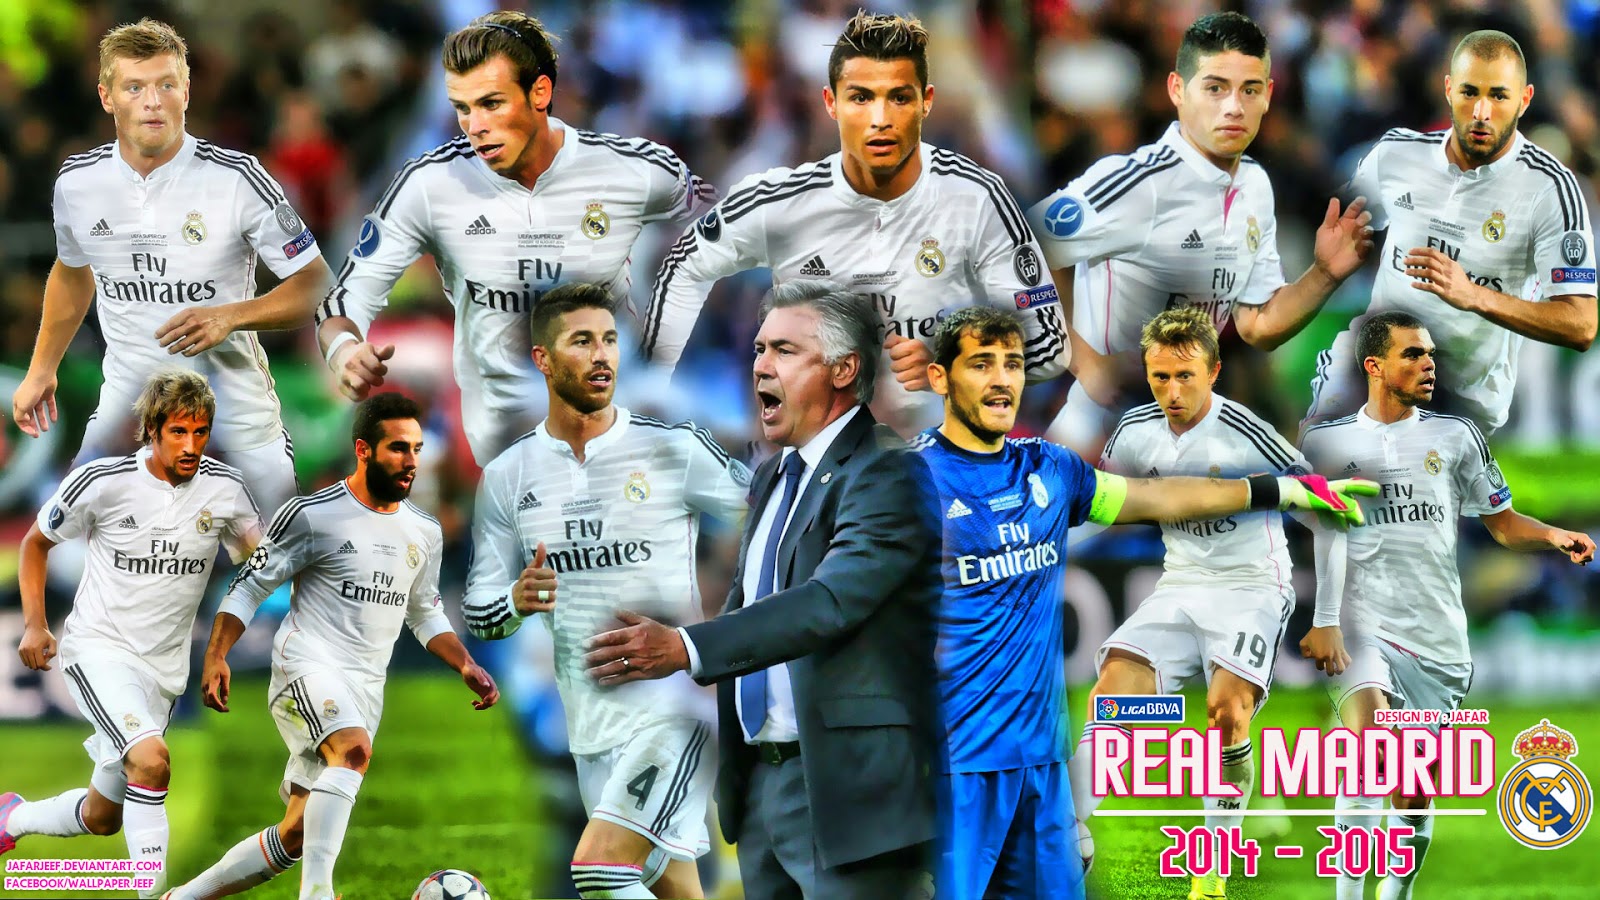 Real Madrid Cf First Team Squad Wallpaper